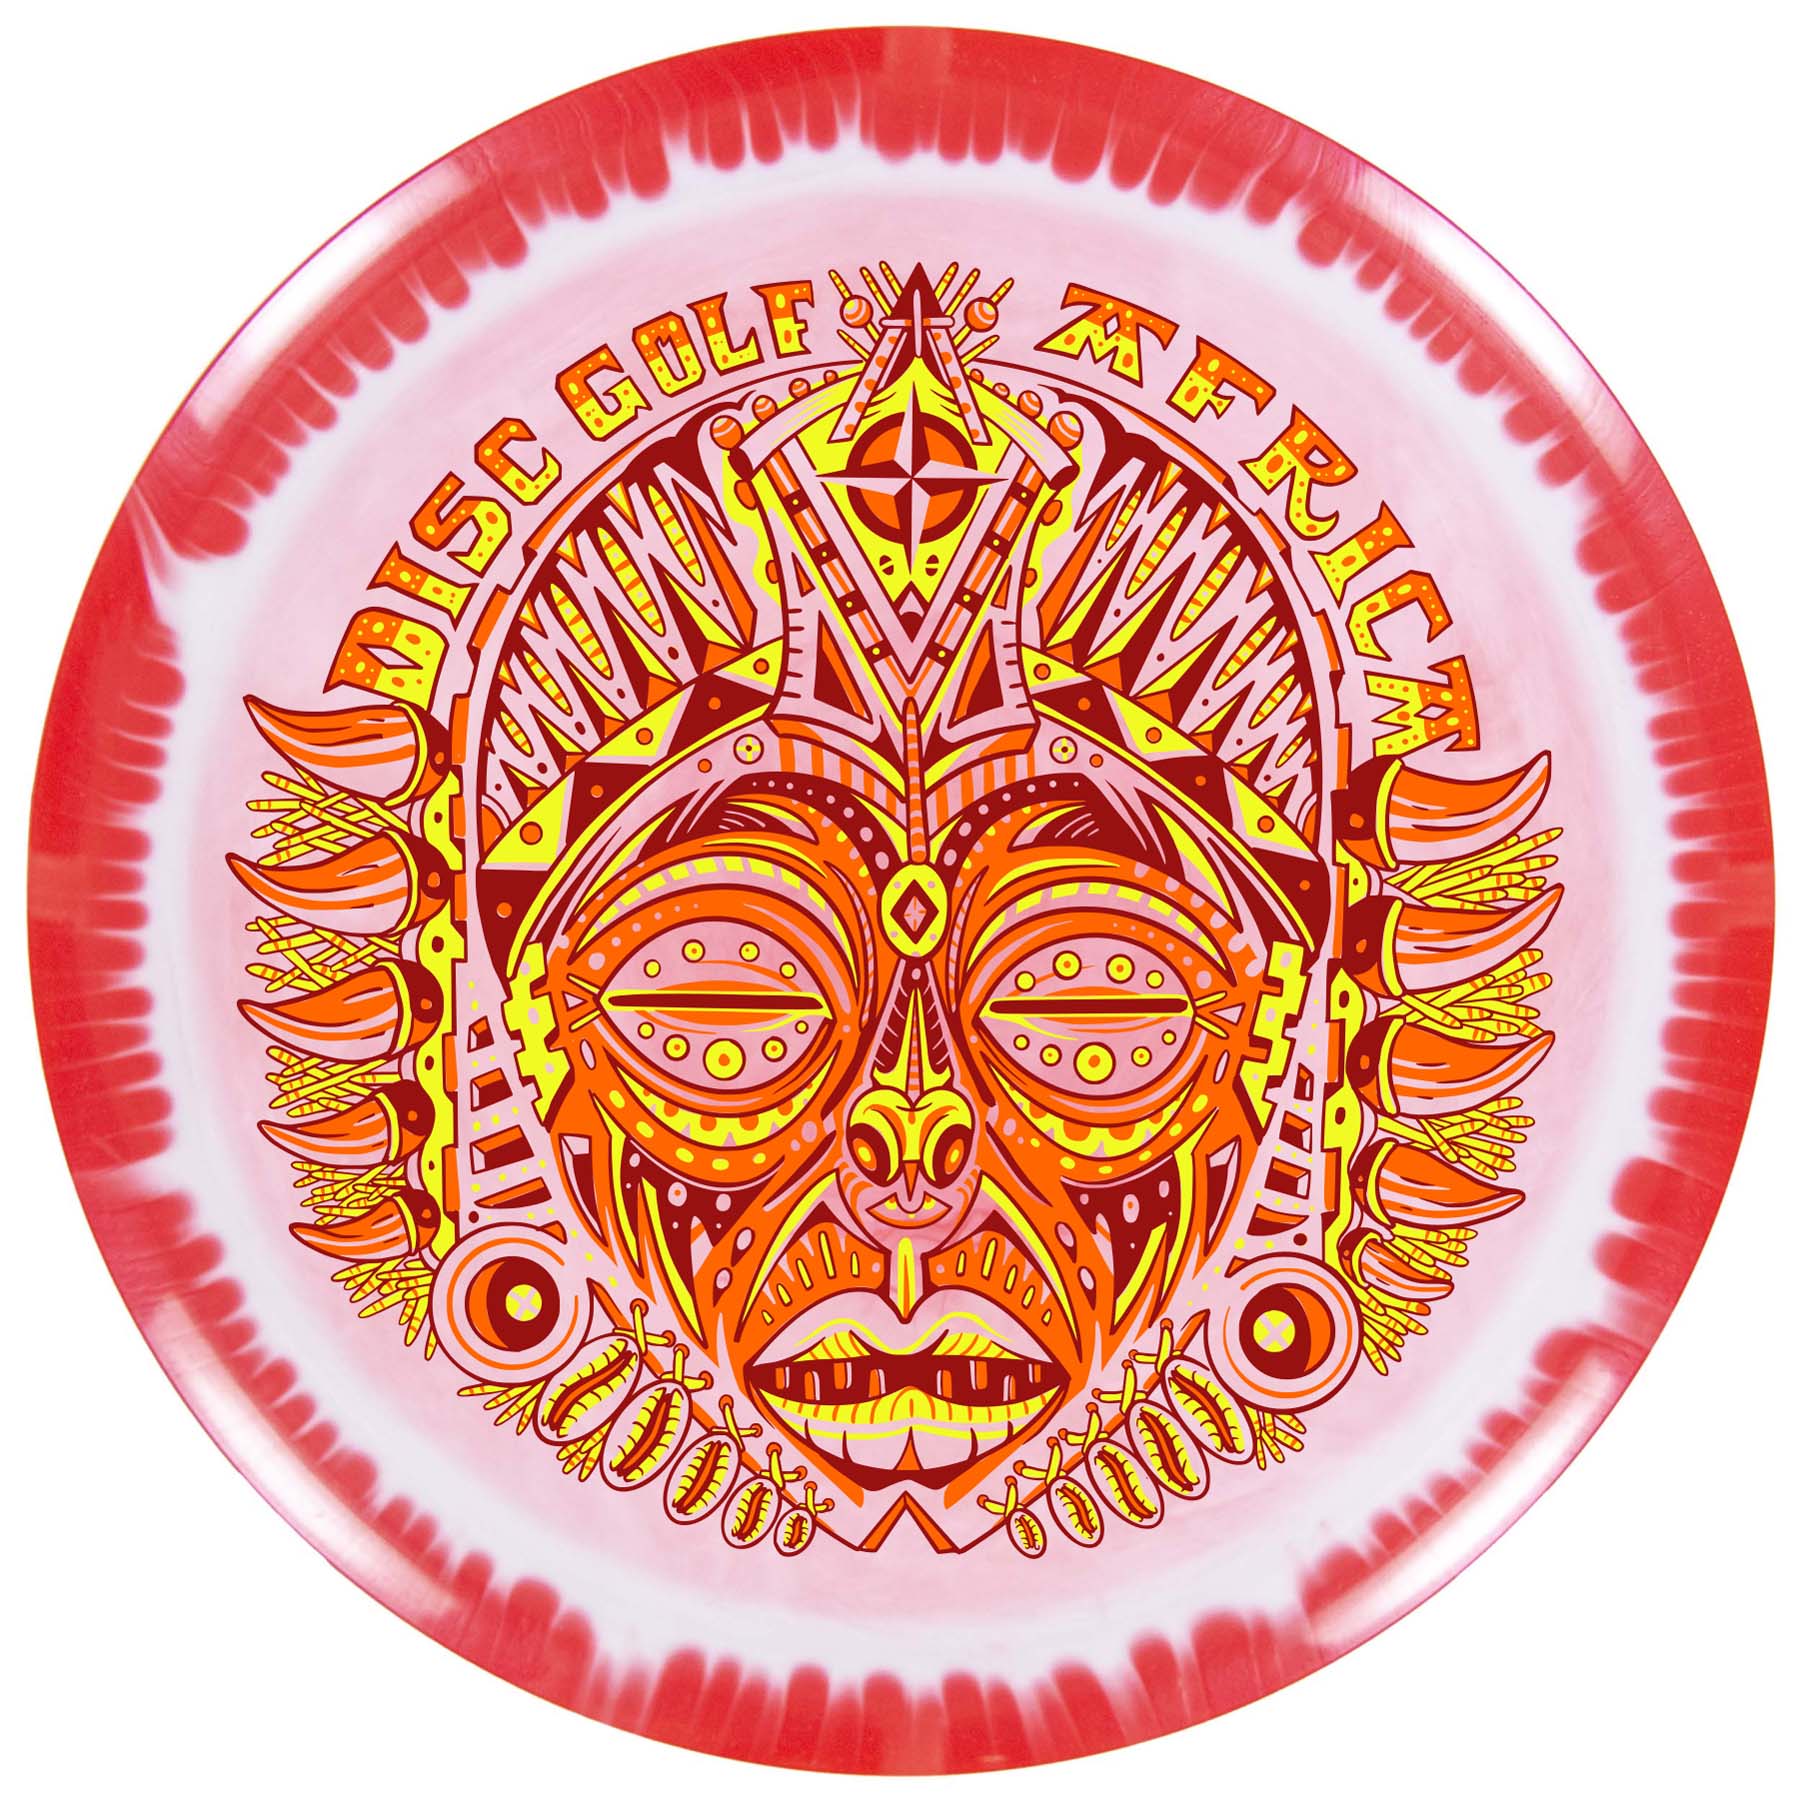 Disc Golf Africa Halo Star Firebird. Red / white colors.